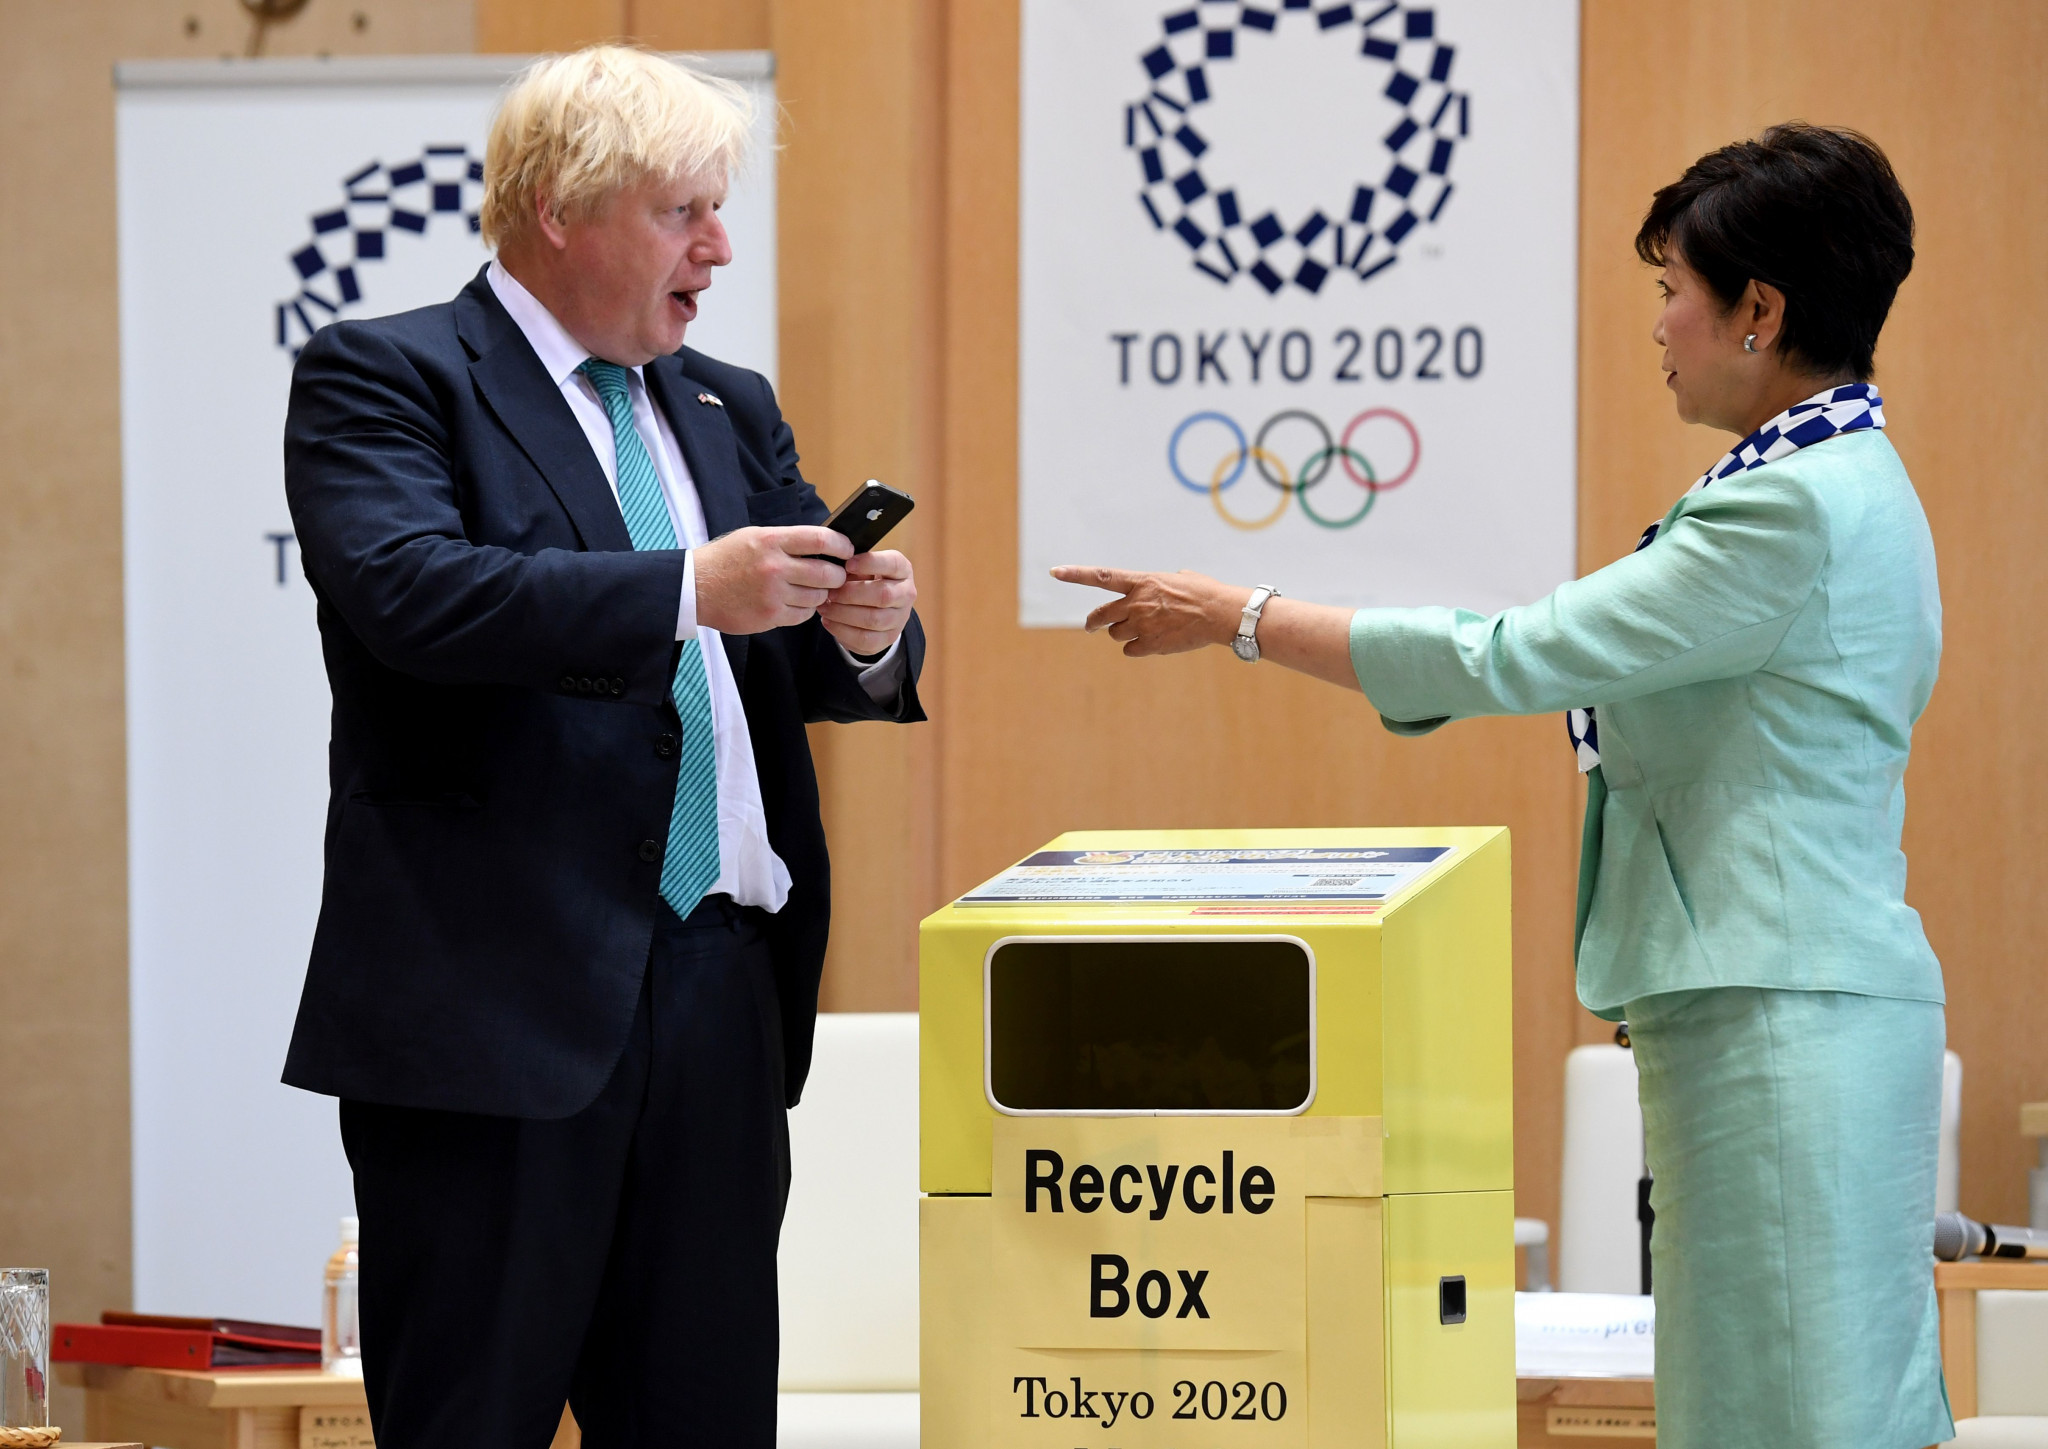 Tokyo 2020 initiative to recycle old phones and turn them into medals fails to enthuse public